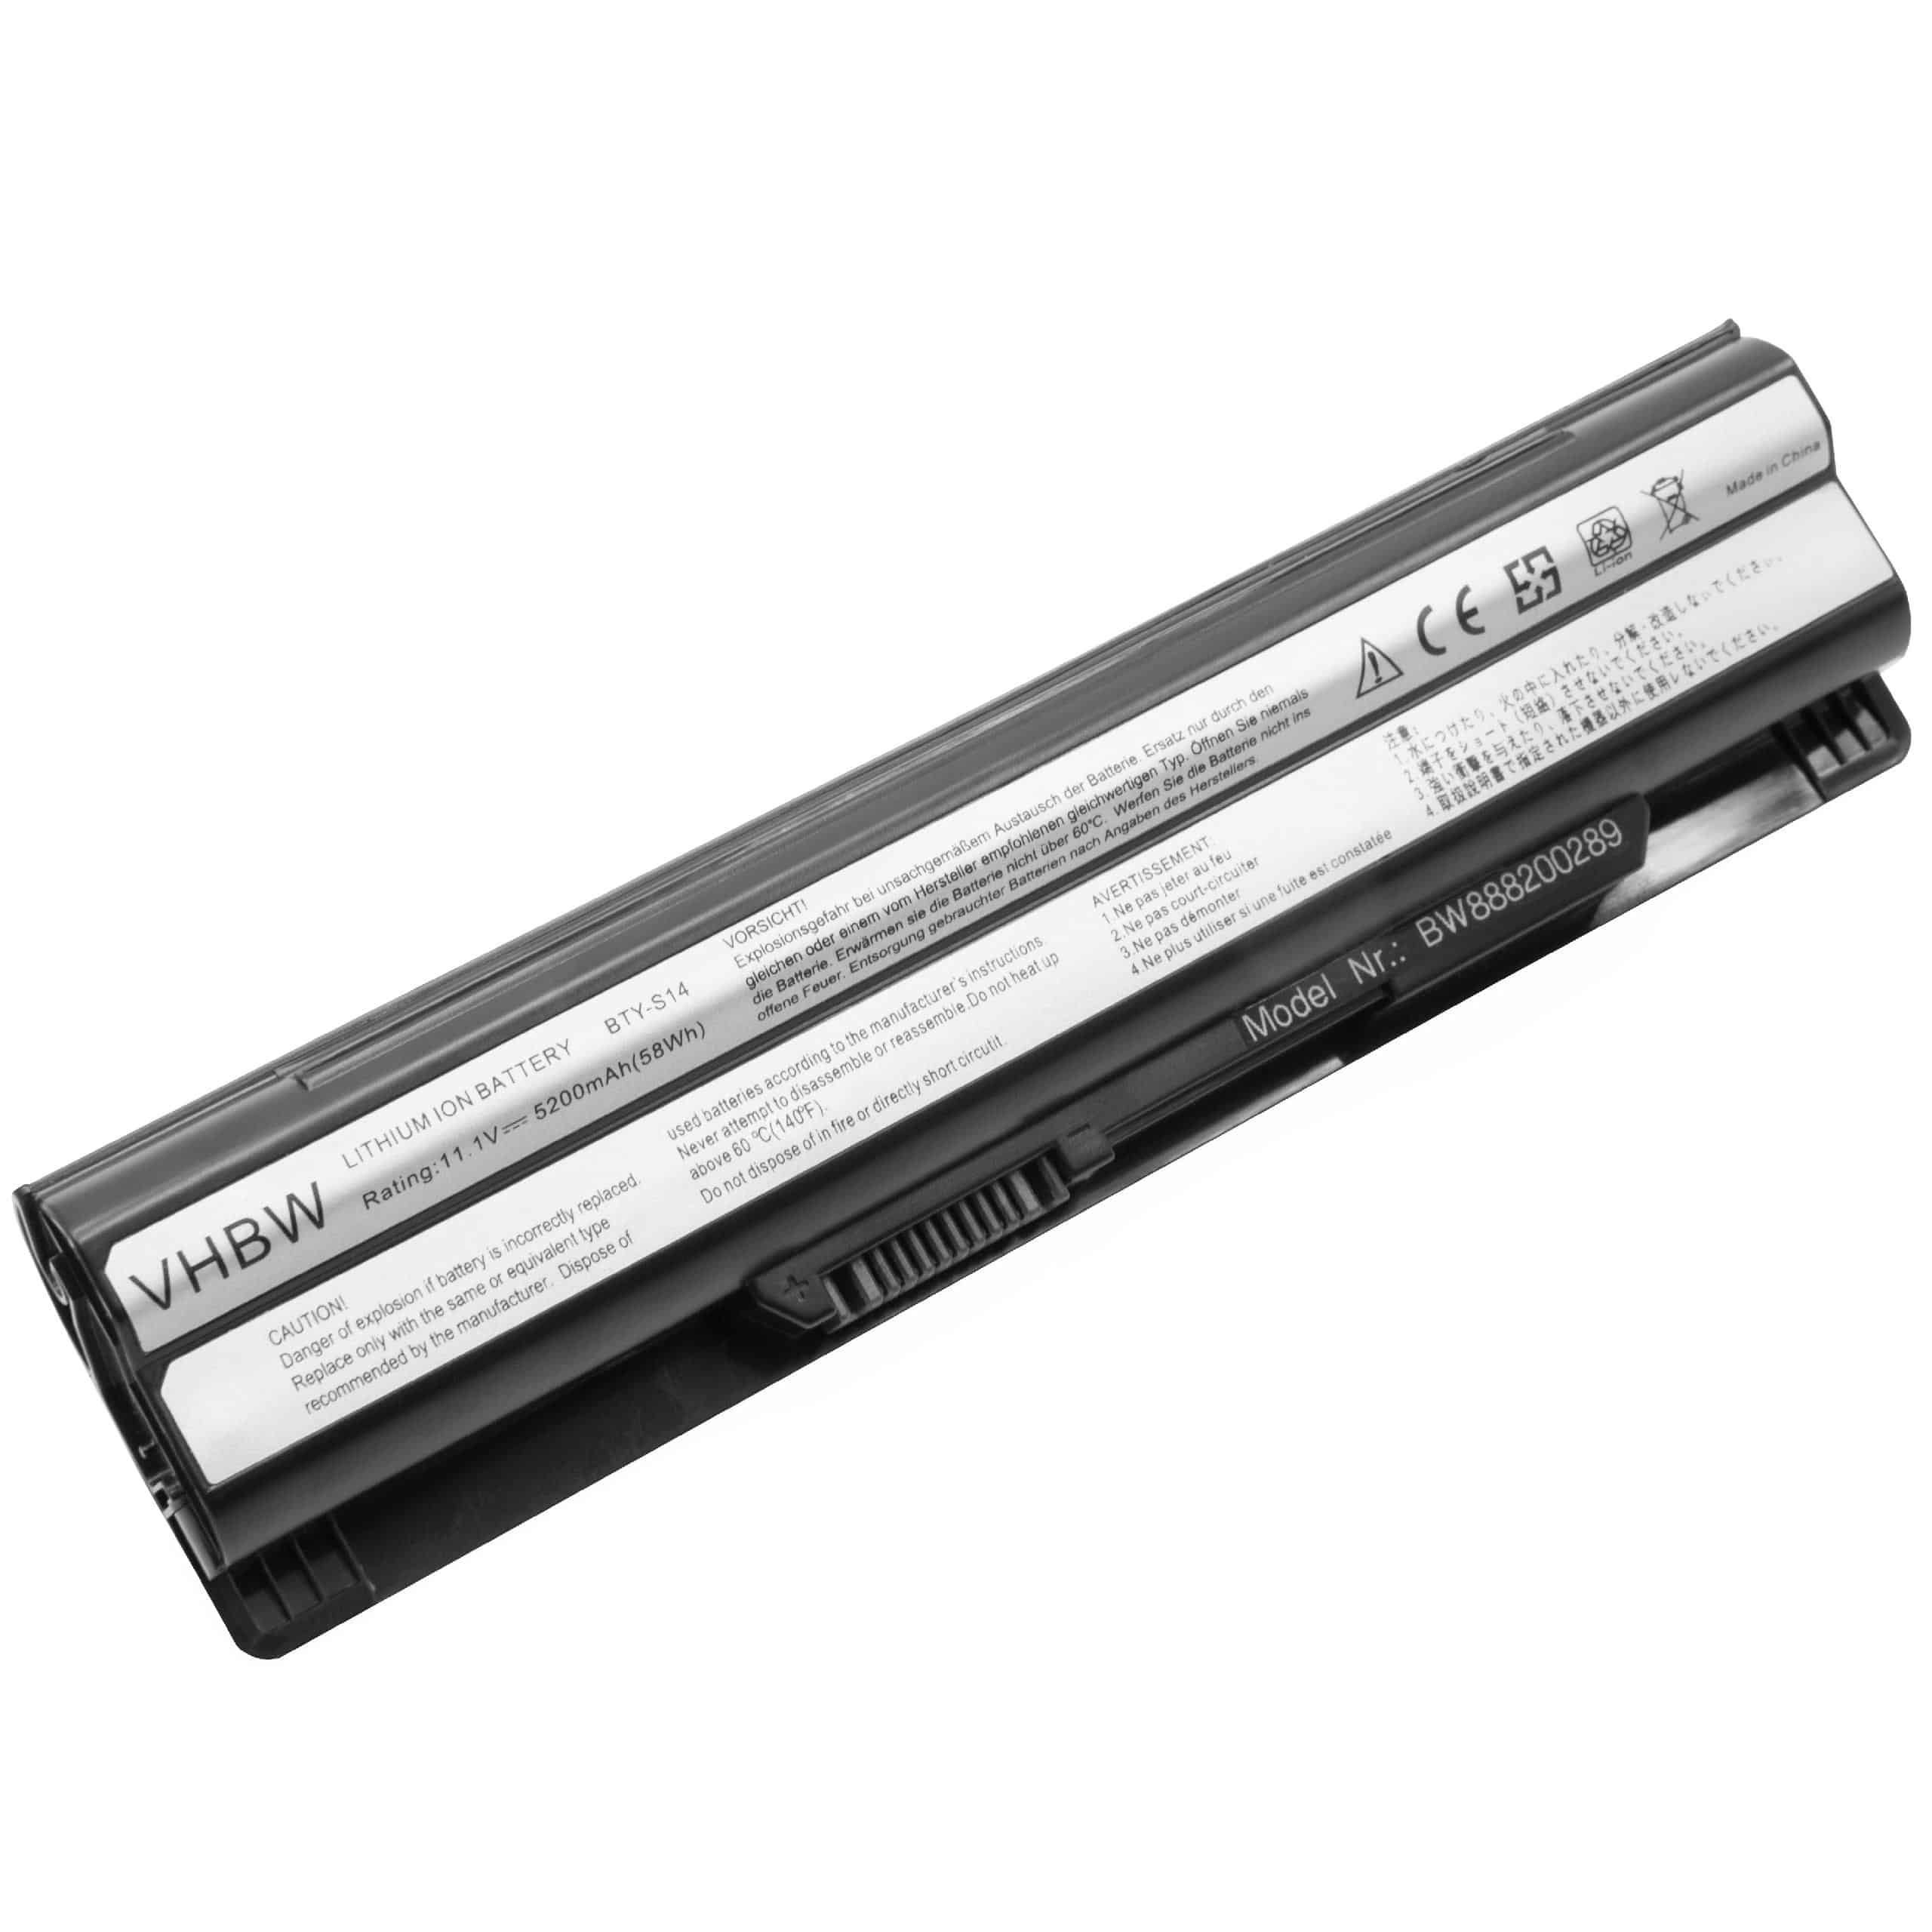 Notebook Battery Replacement for Medion BTY-S14, 40029150, 40029231, 40029683 - 5200mAh 11.1V Li-Ion, black